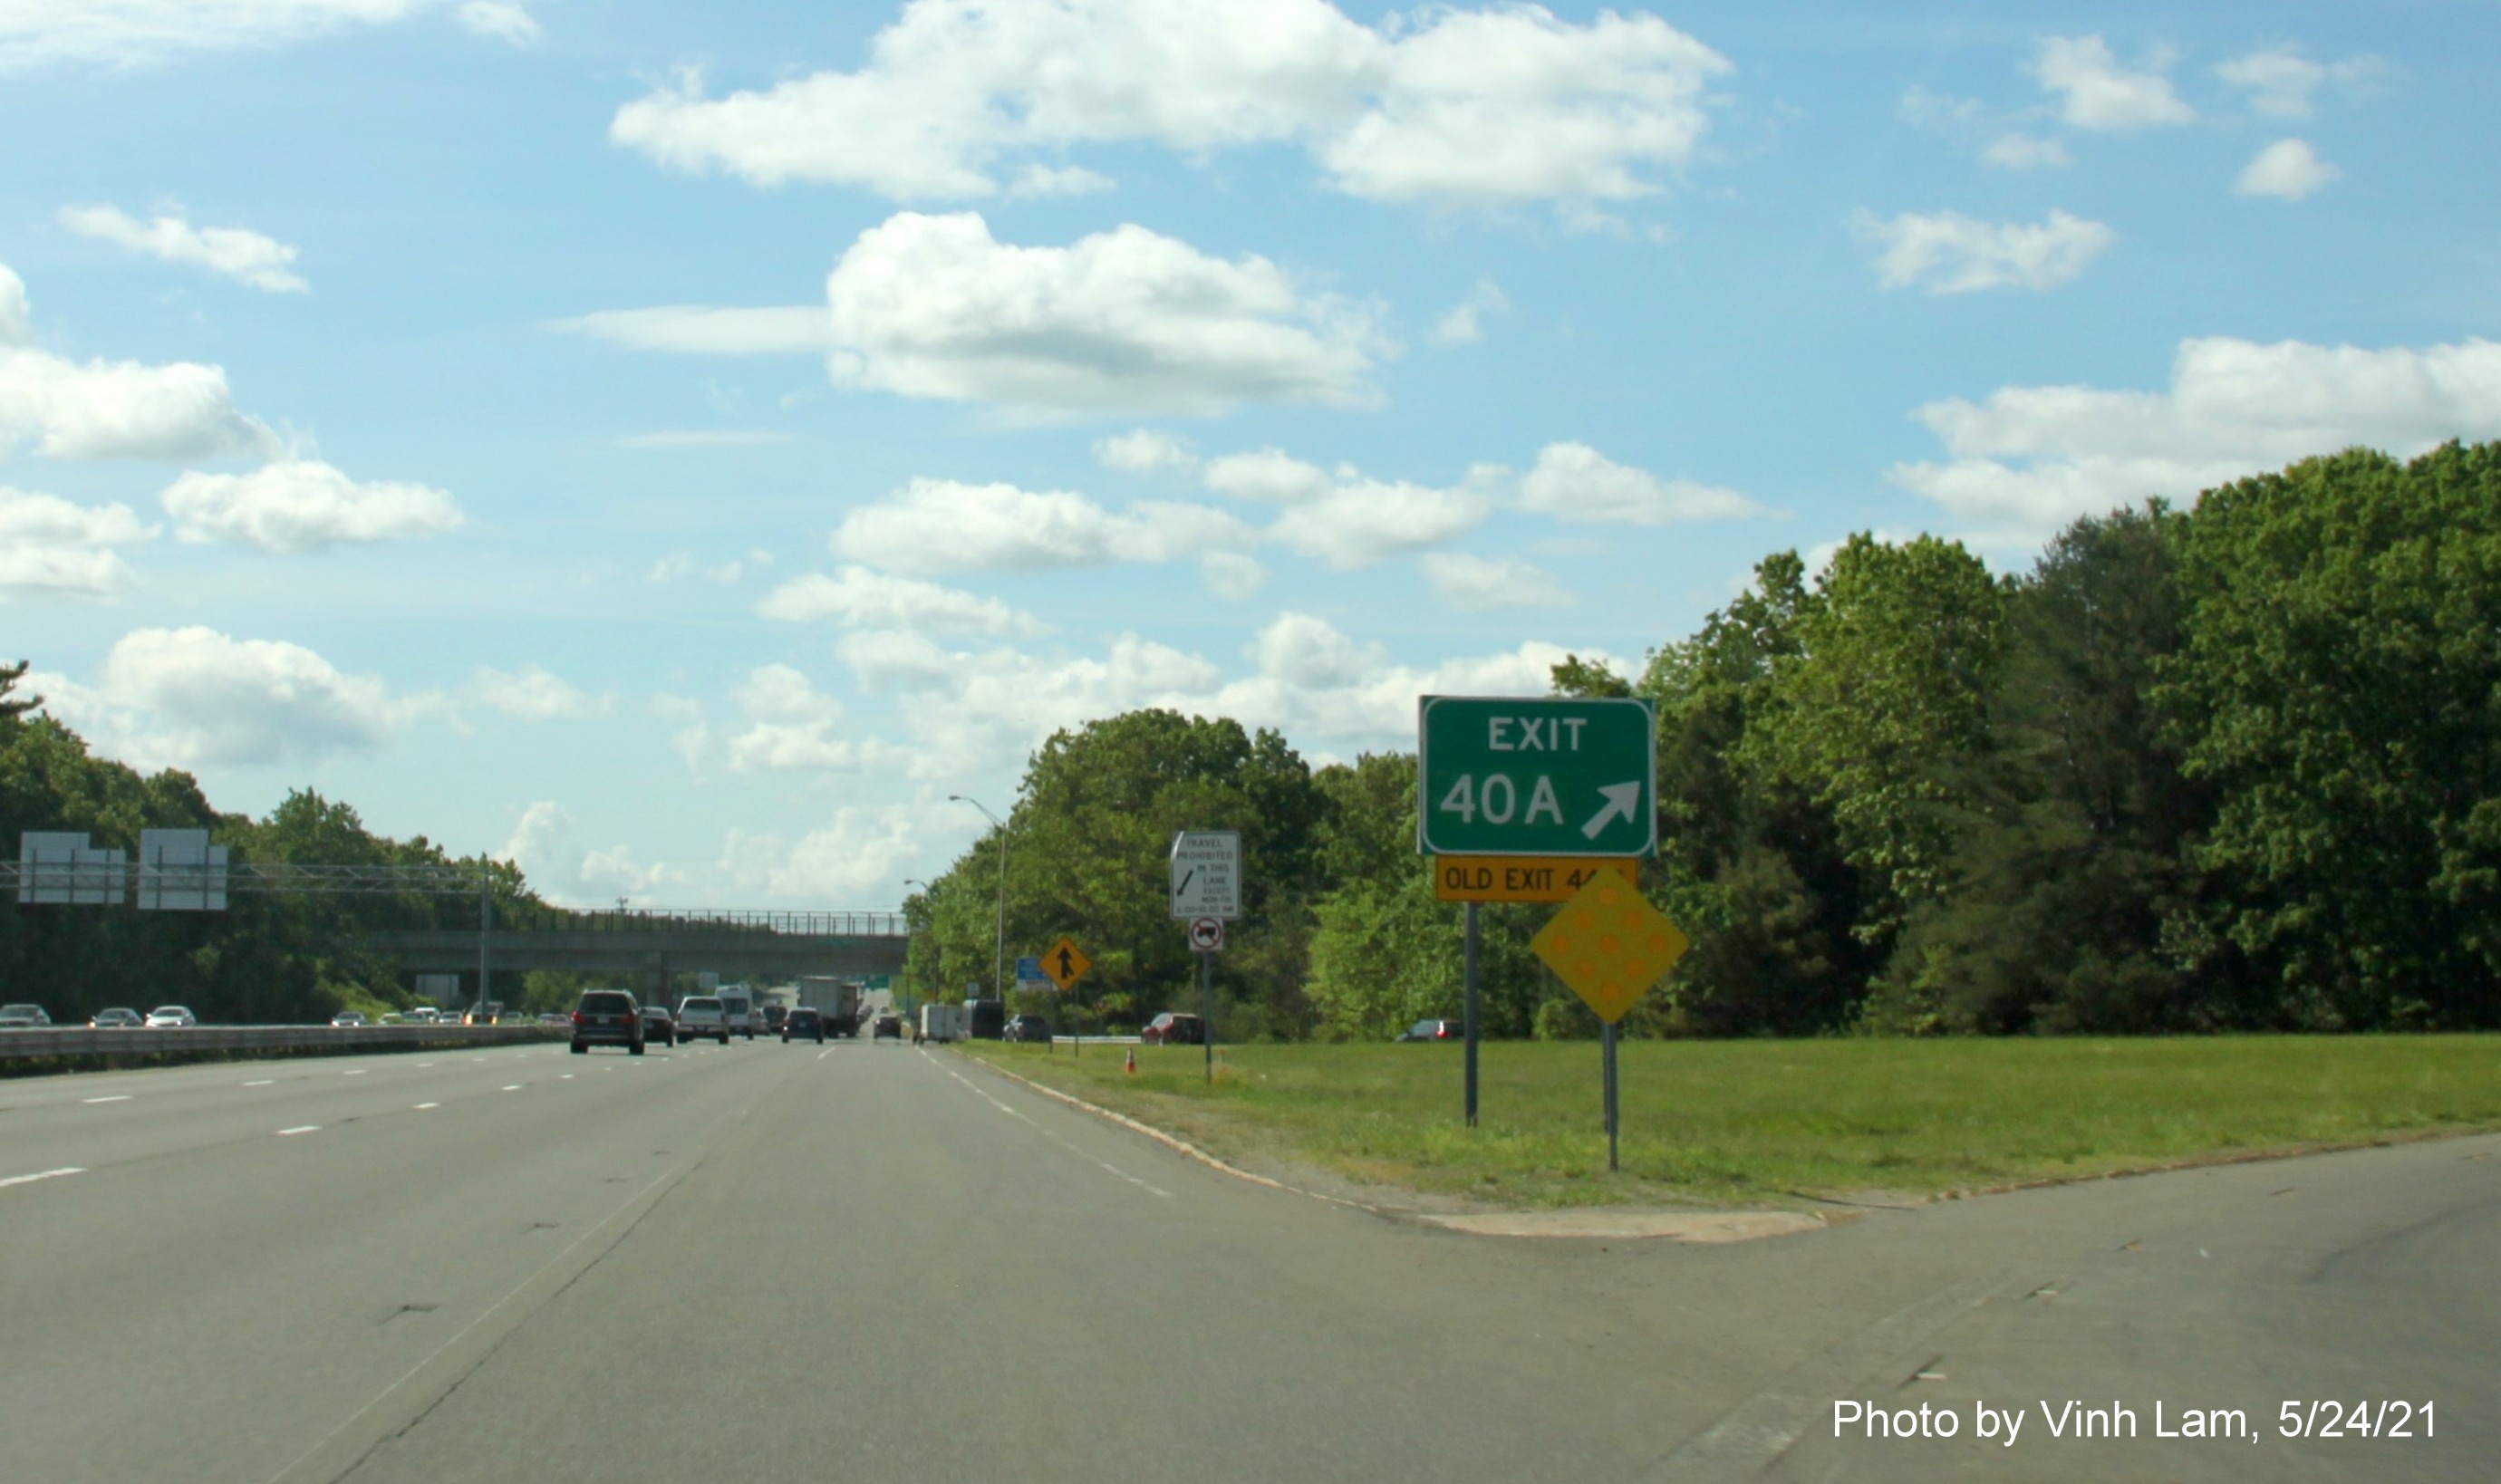 Image of gore sign for I-495 North exit with new milepost based exit number and yellow Old Exit 44 A sign attached below on I-93 South in Andover, by Vinh Lam, May 2021